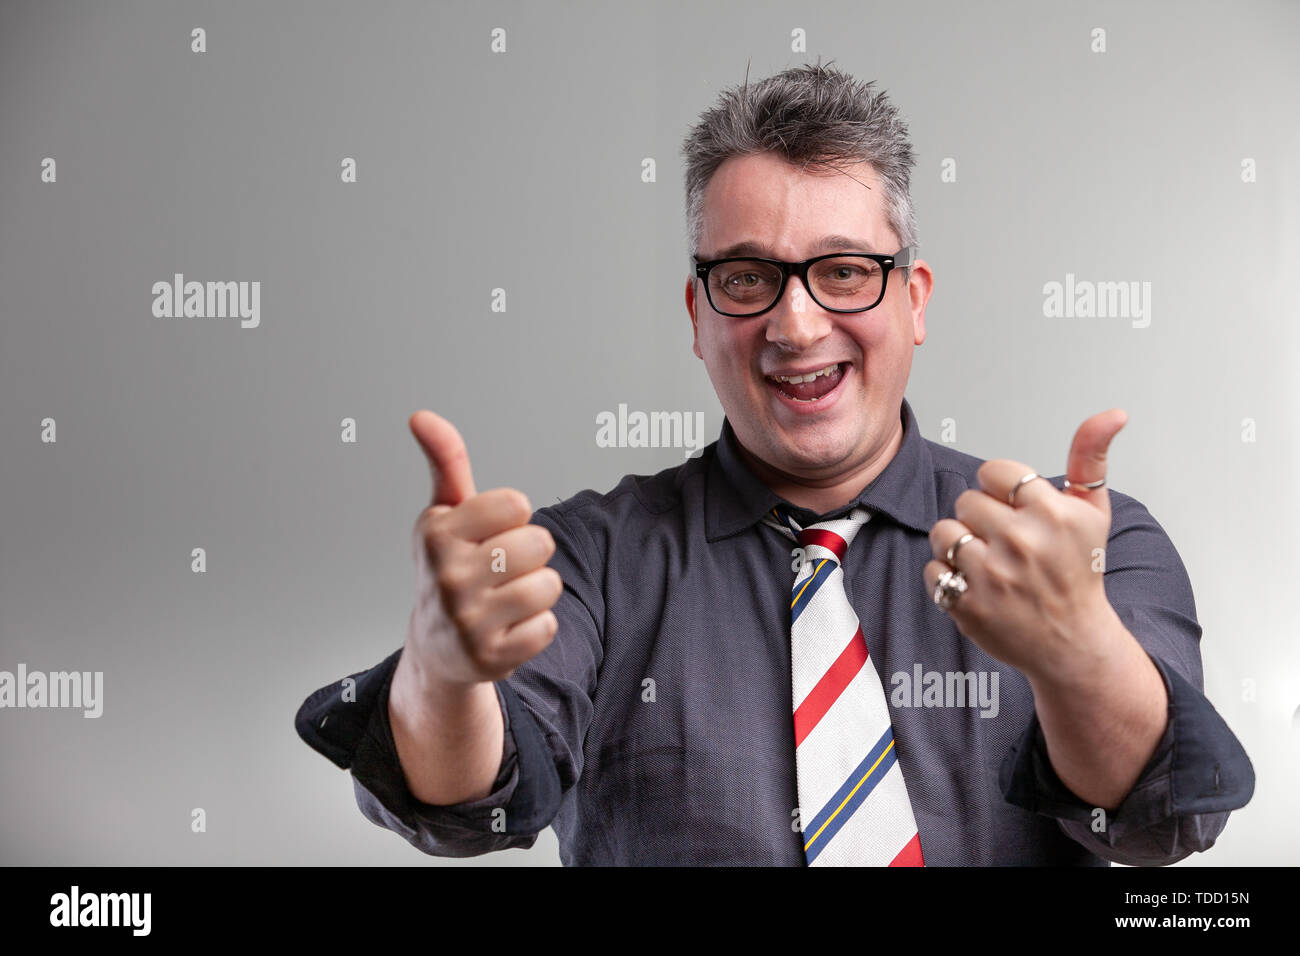 Exultant businessman giving a double thumbs up with a happy gleeful smile as he celebrates a win or victory or offers his support Stock Photo